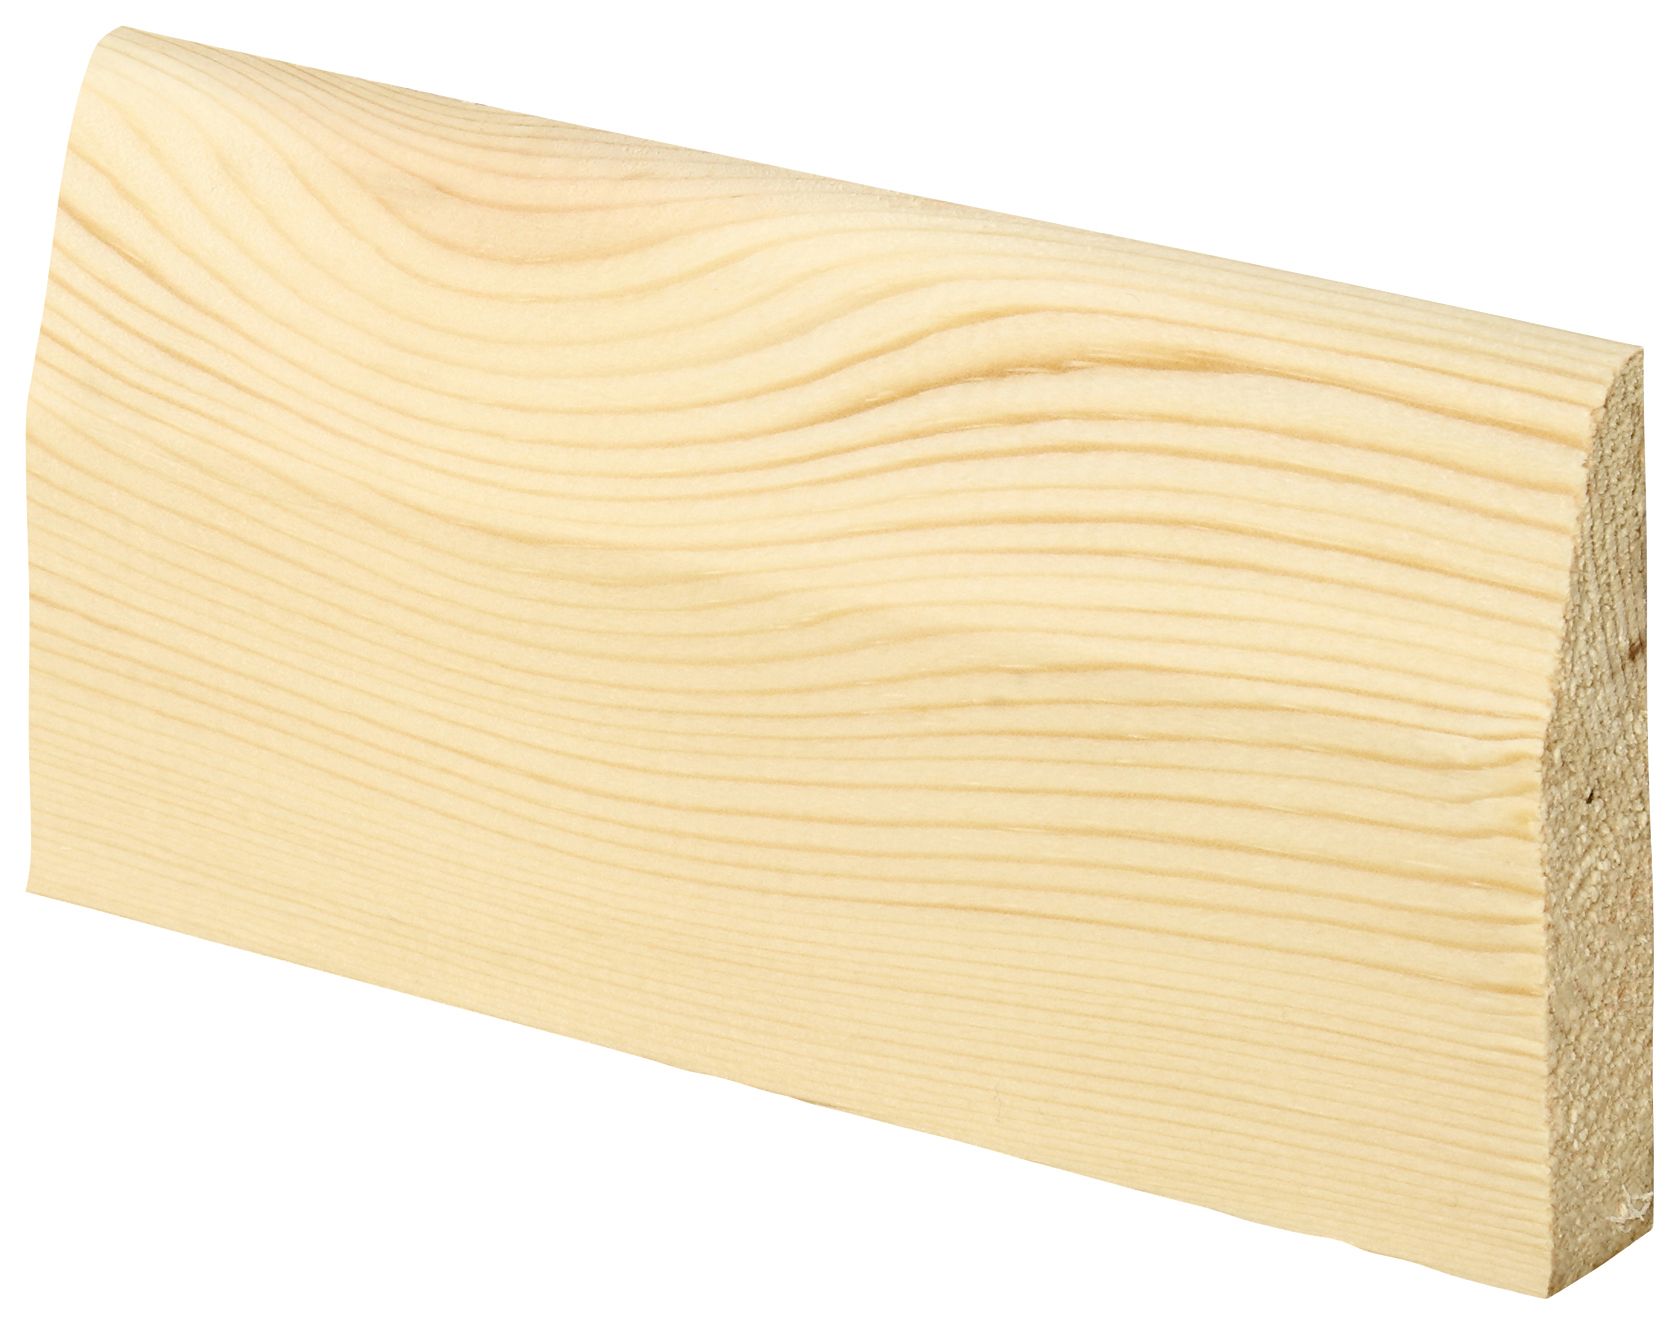 Image of Wickes Chamfered Pine Architrave 19 x 69 x 2100mm Pack of 5